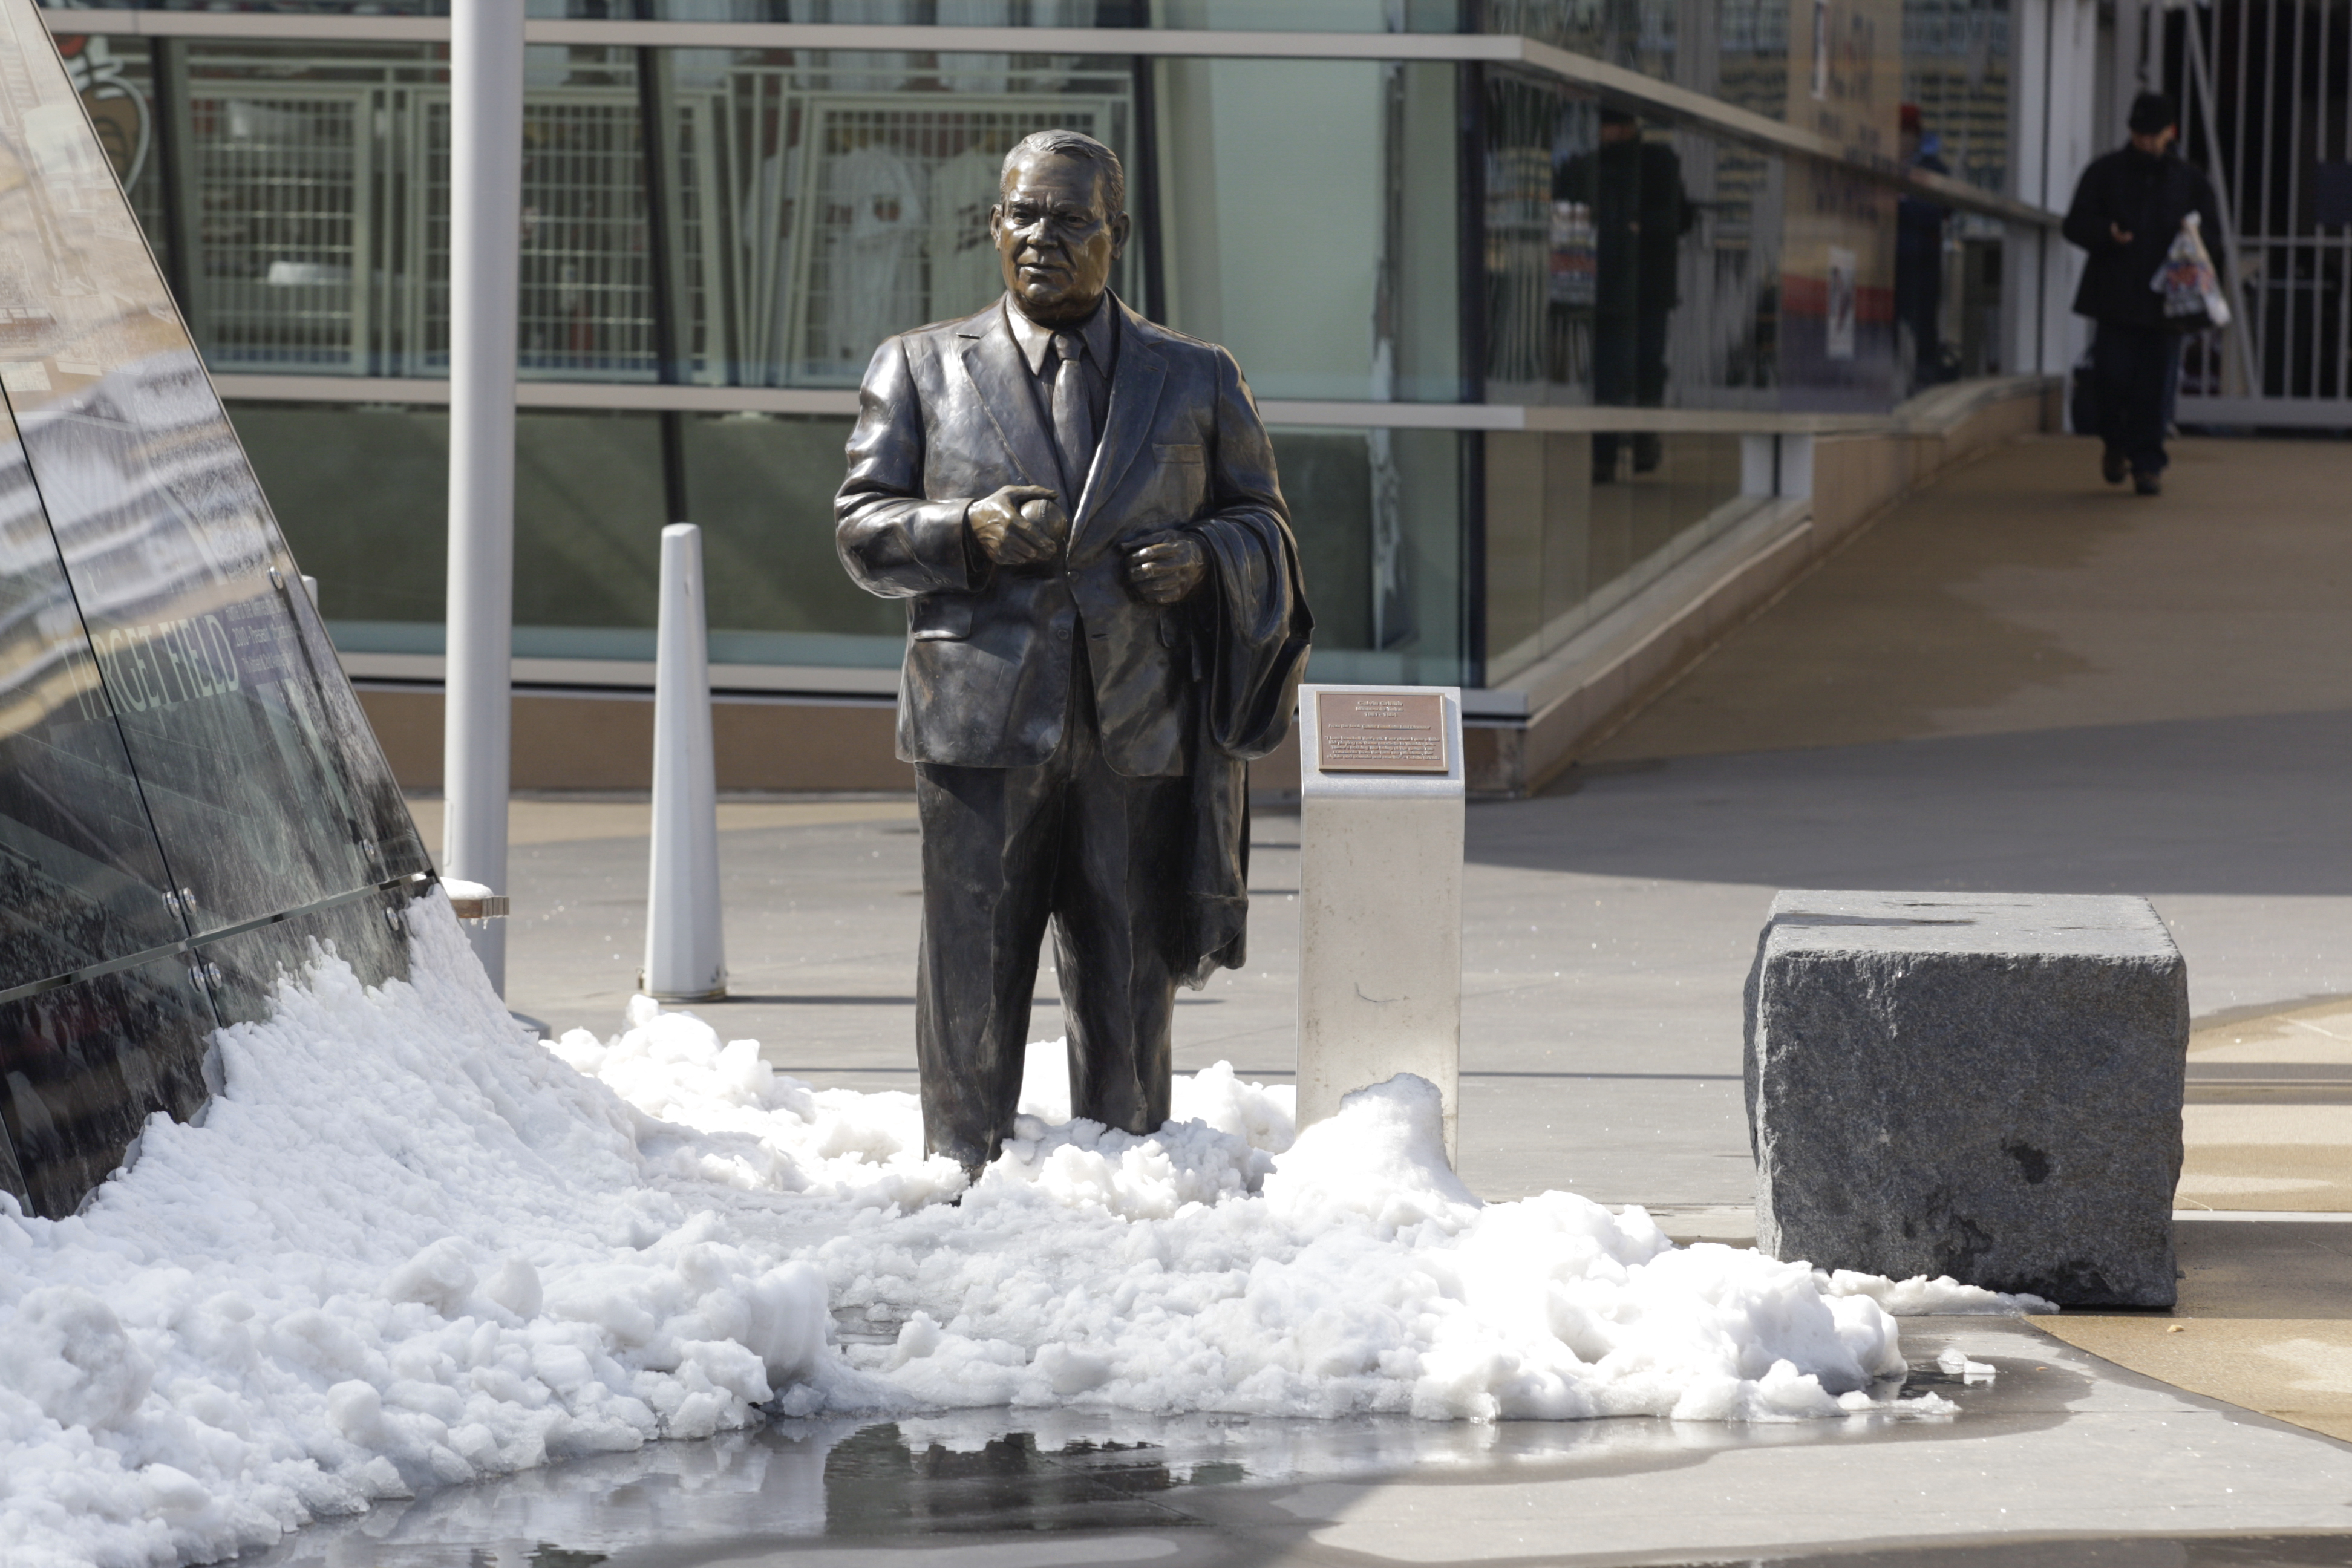 A statue of former Twins' owner Calvin Griffith stands in the snow outside Target Field before a baseball game between the Minnesota Twins and the Toronto Blue Jays, Thursday, April 17, 2014, in Minneapolis. (AP Photo/Paul Battaglia)